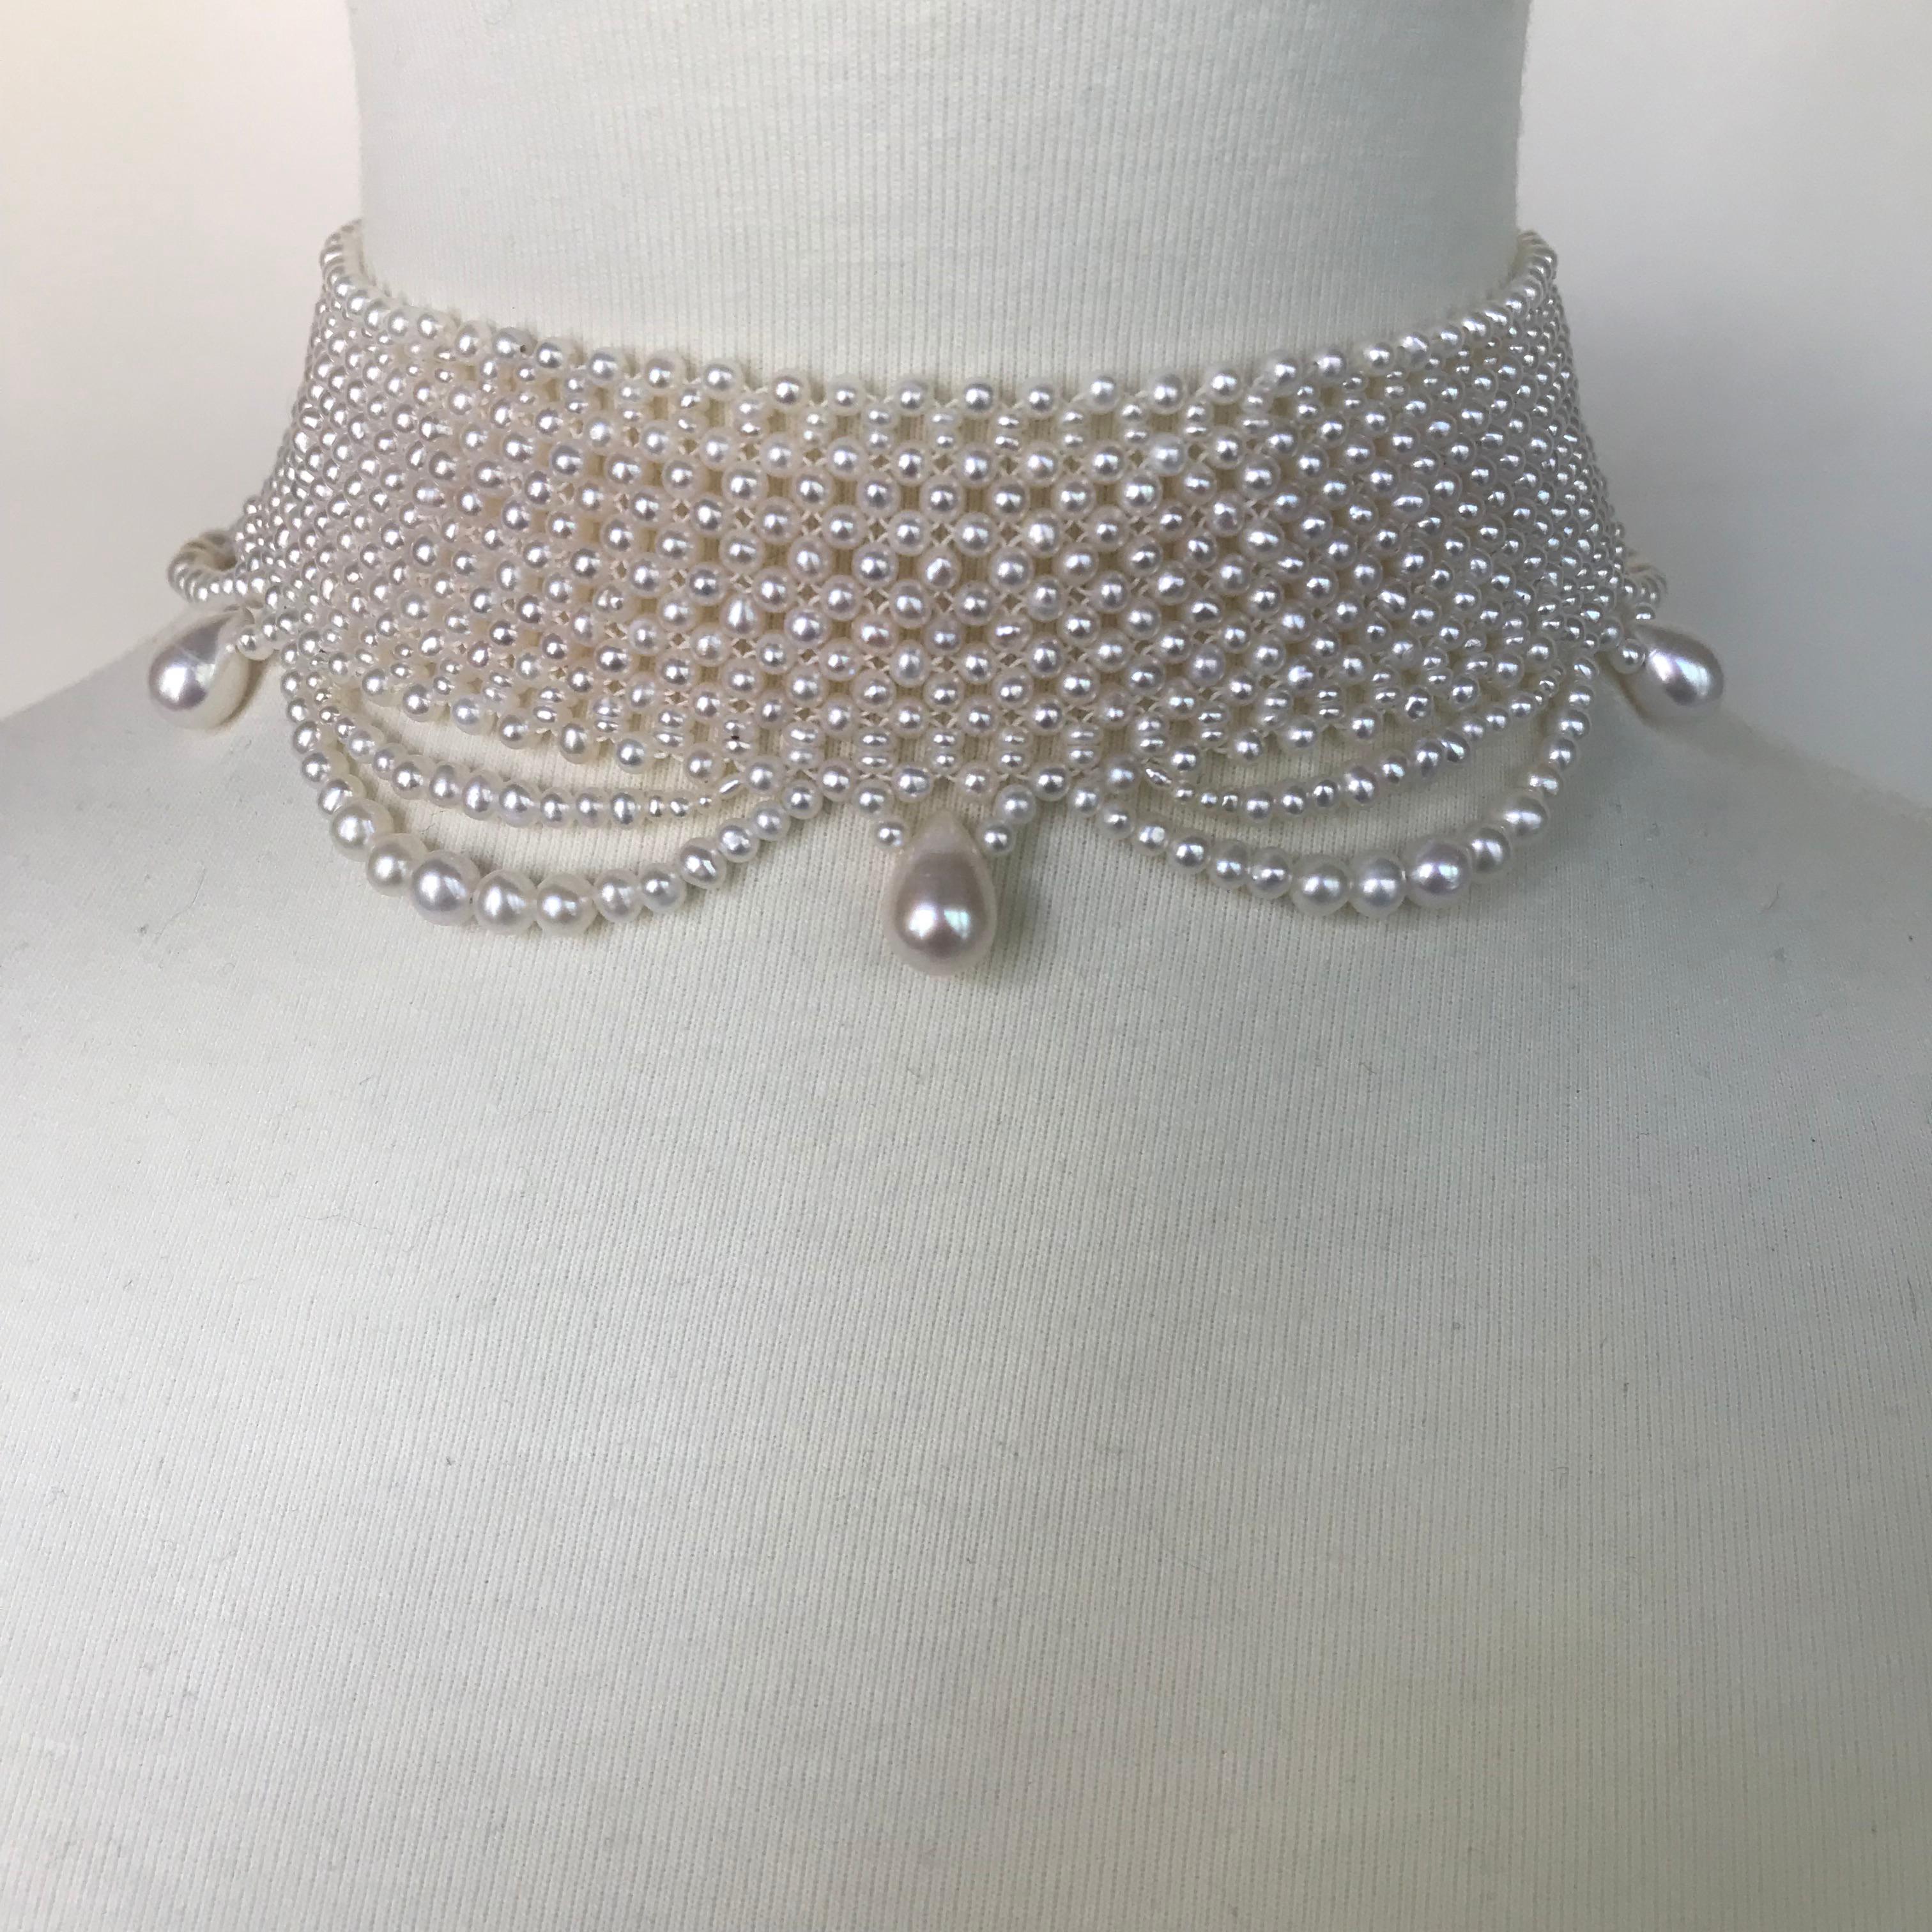 Bead Marina J. Woven Pearl Draped Choker with Pearl drops and secure sliding clasp